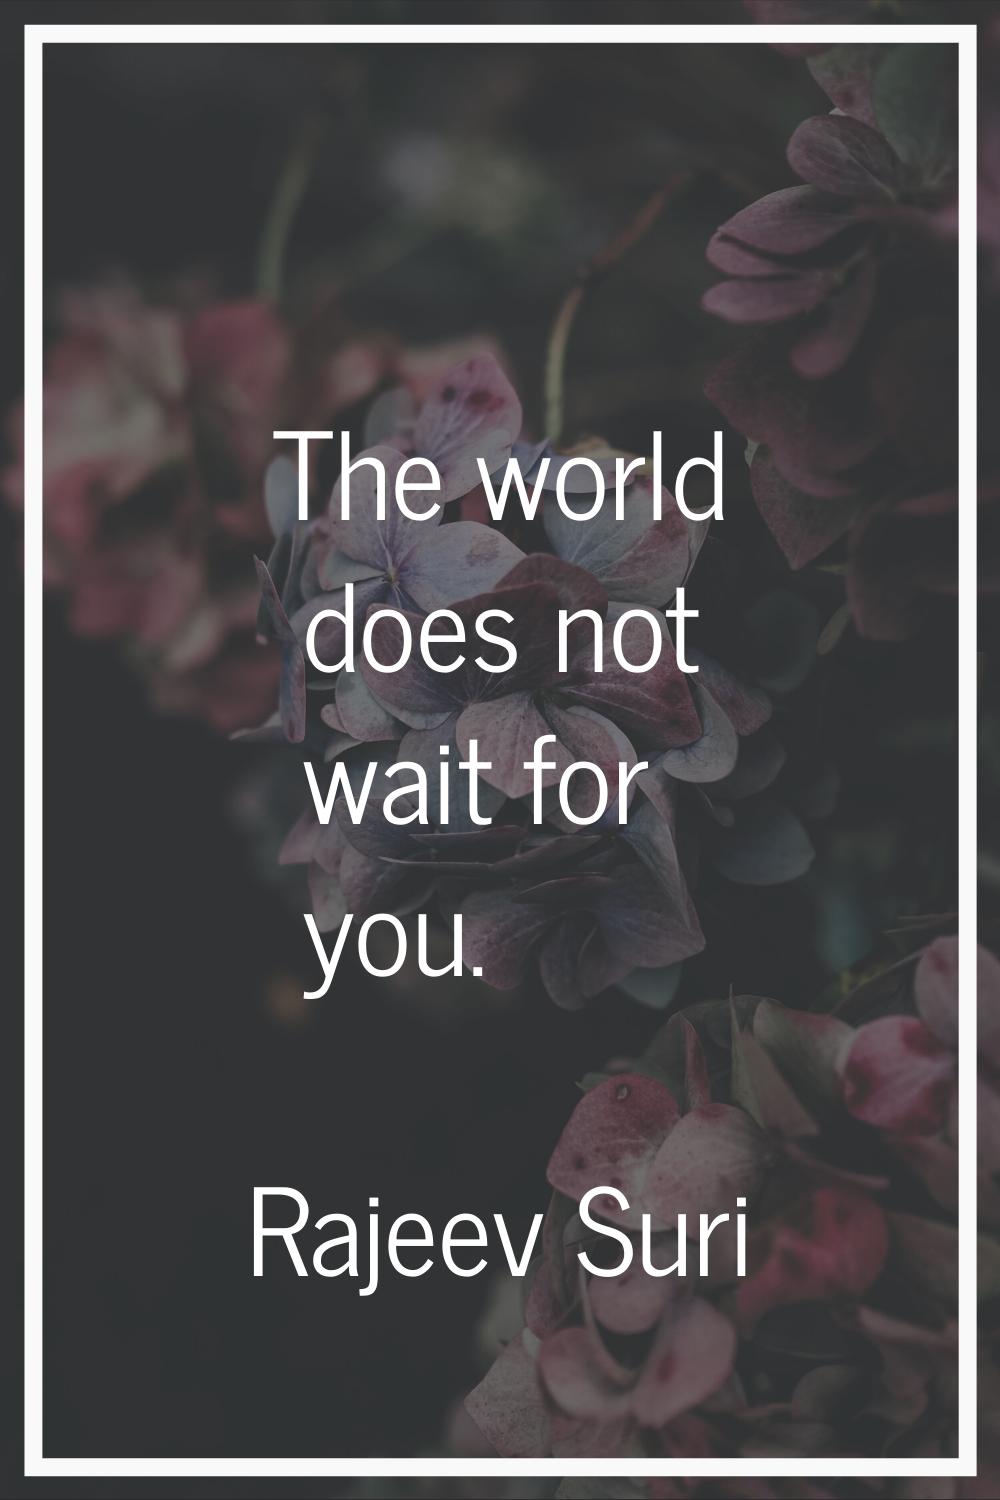 The world does not wait for you.